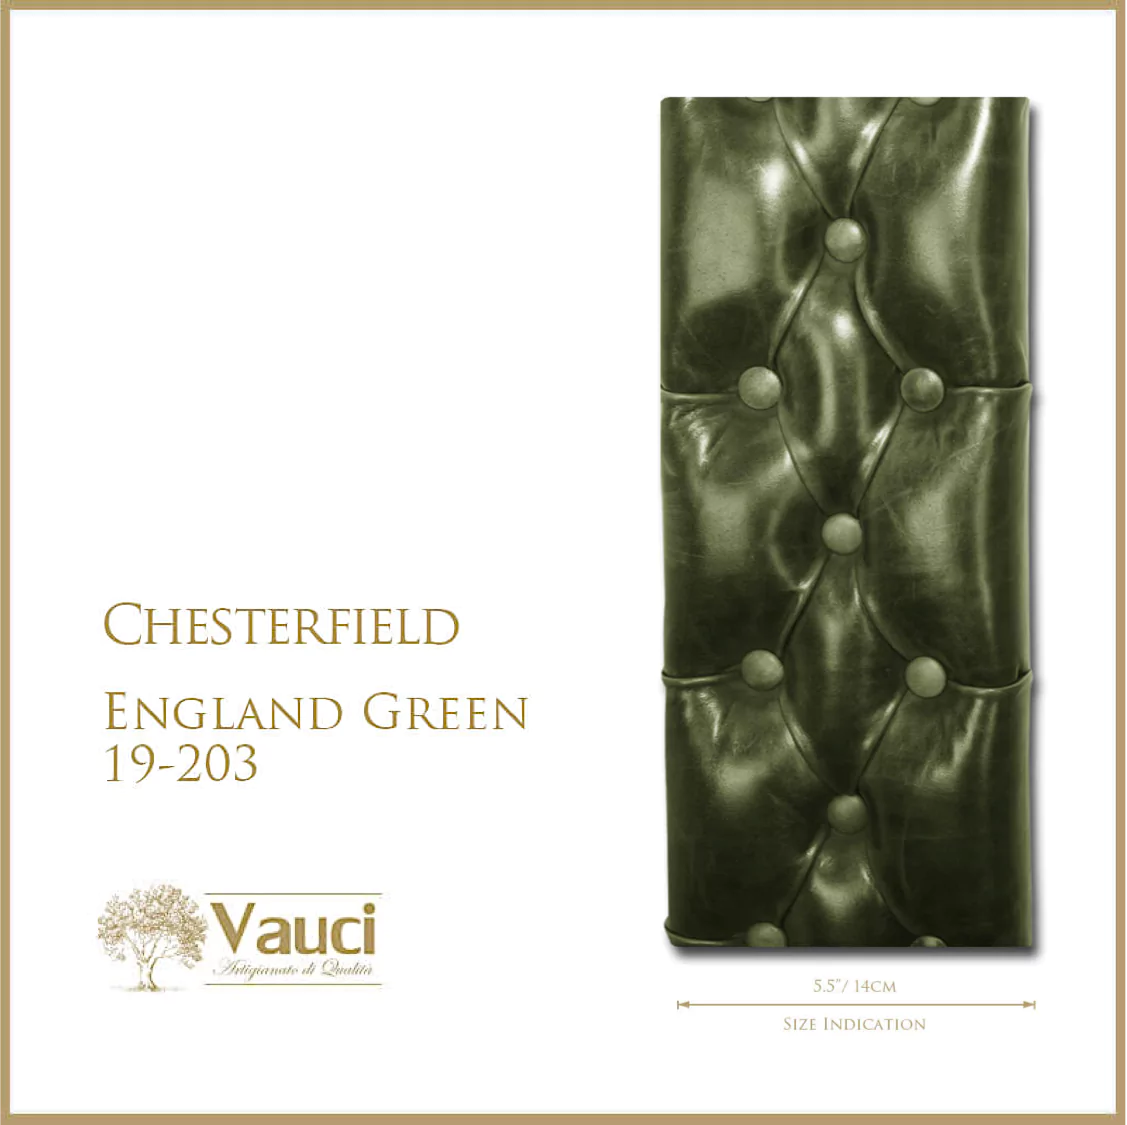 Chesterfield England Green